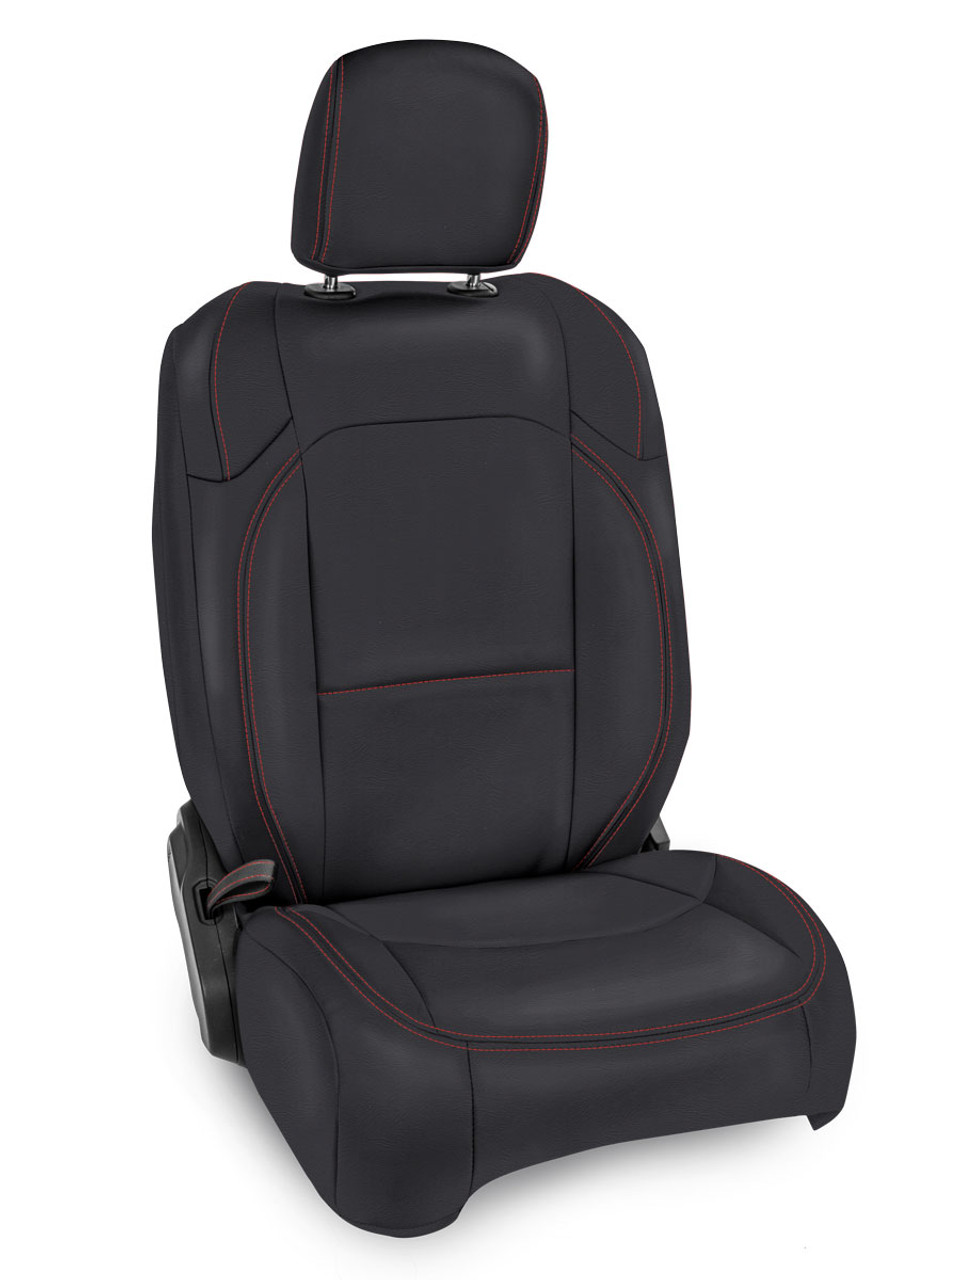 Front Seat Covers for Jeep Wrangler JL, 4 door; Jeep Gladiator JT; Rubicon (Pair) - Black with Red Stitching